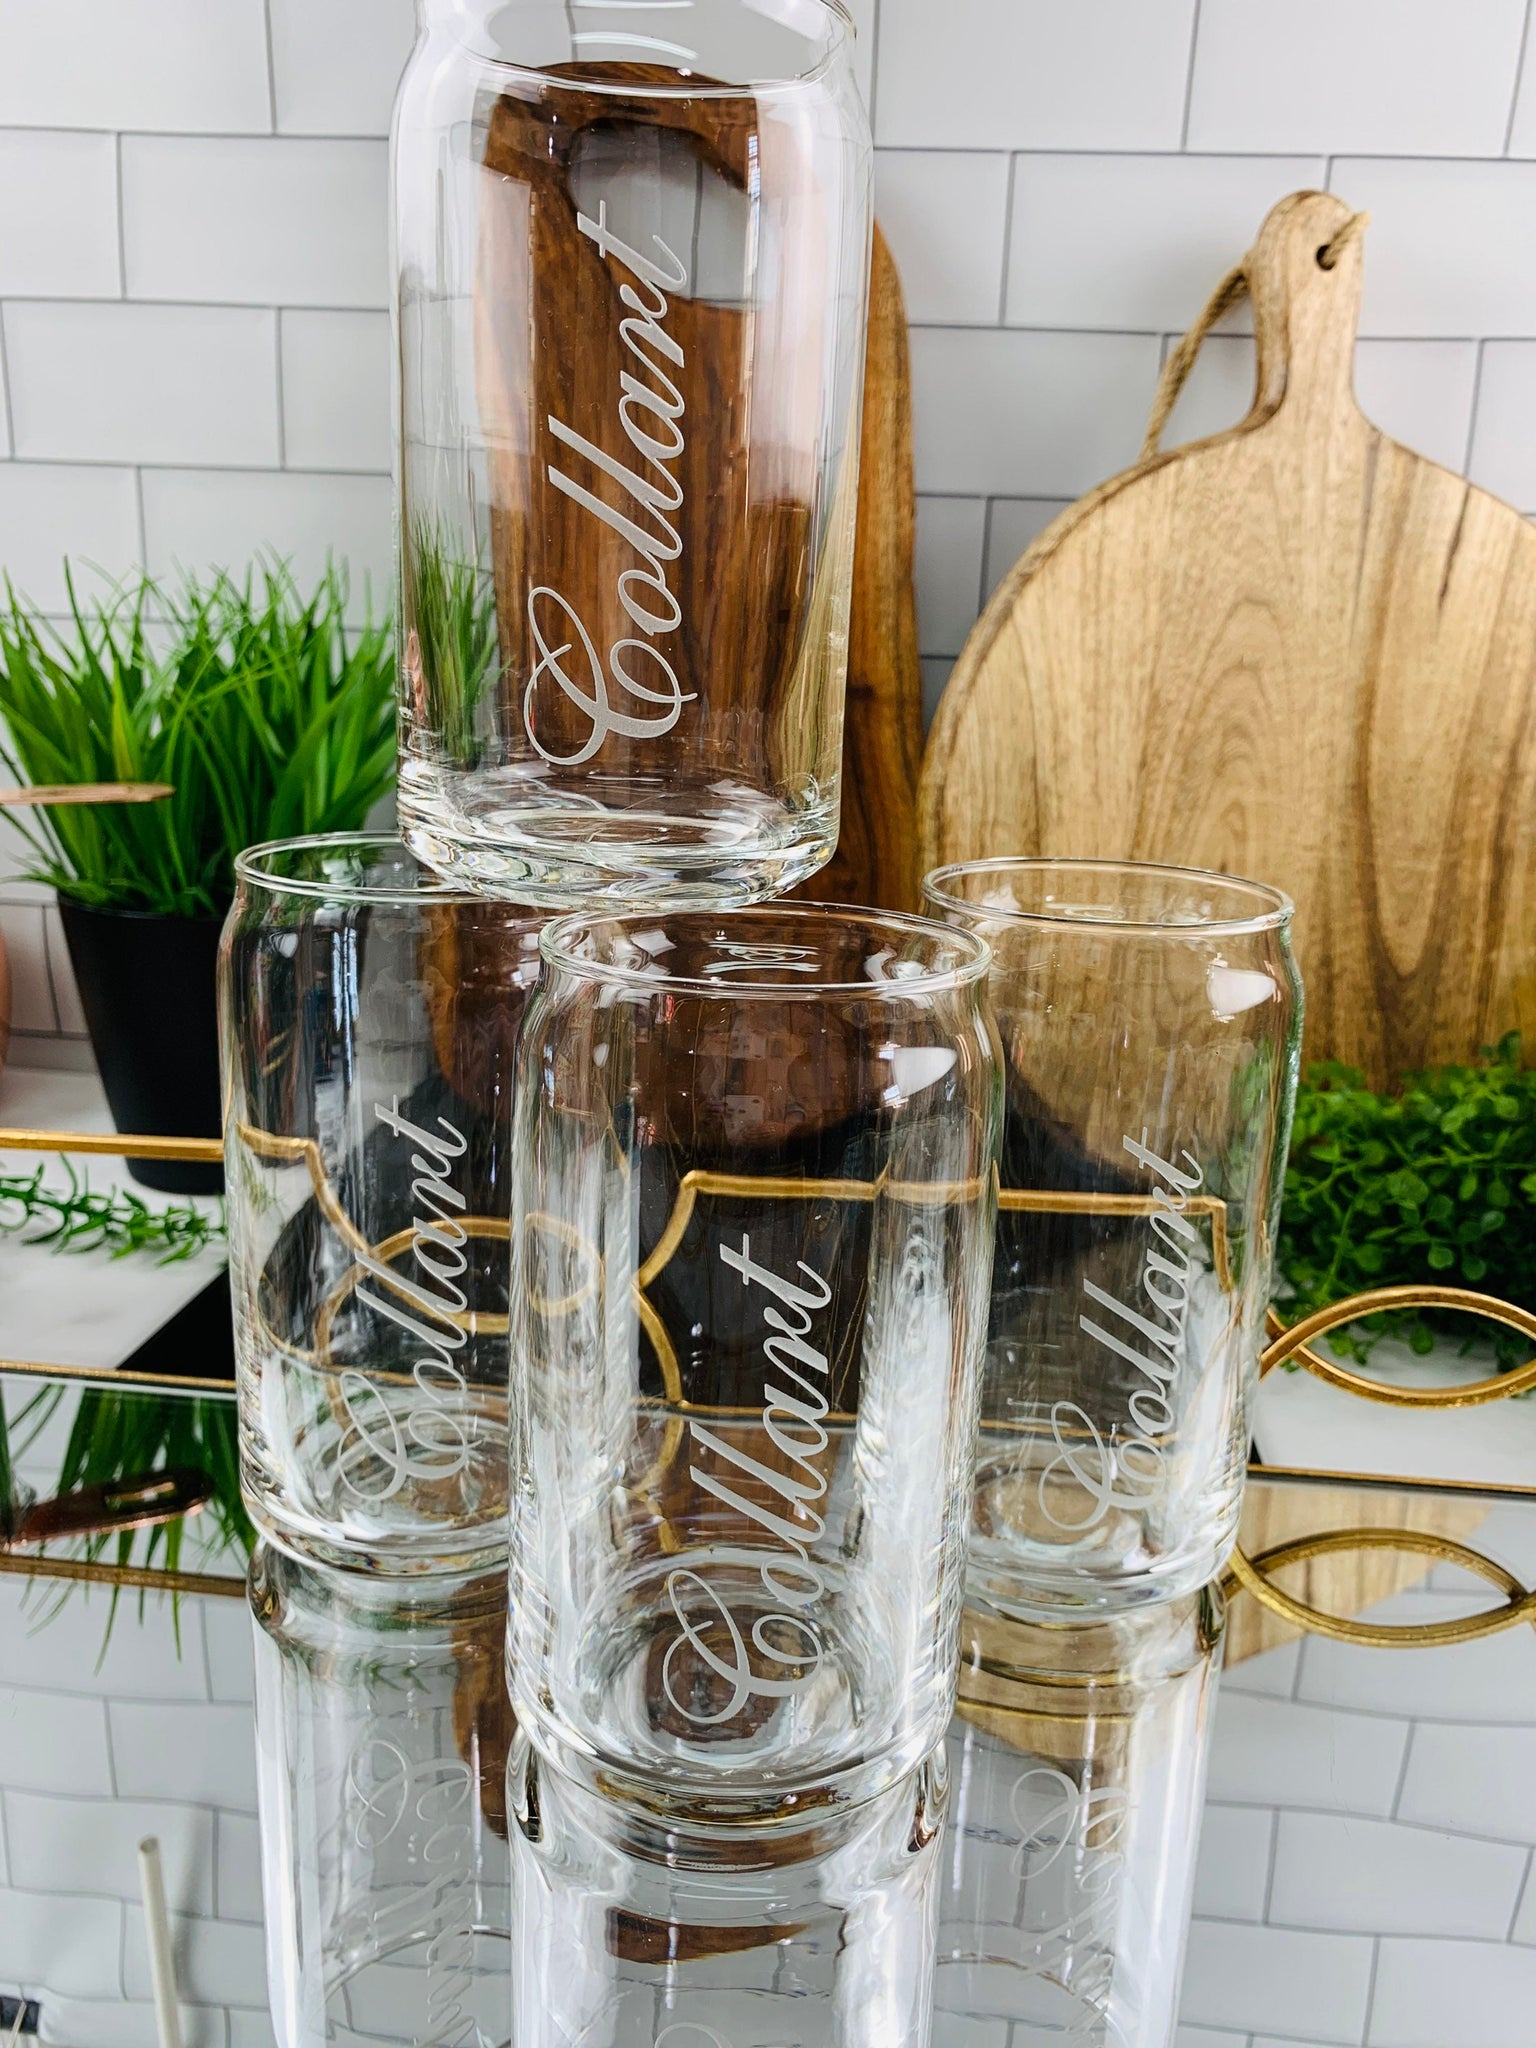 Beer Can Glasses with Bamboo Lid (NO STRAW) - TeckWrap Craft Europe